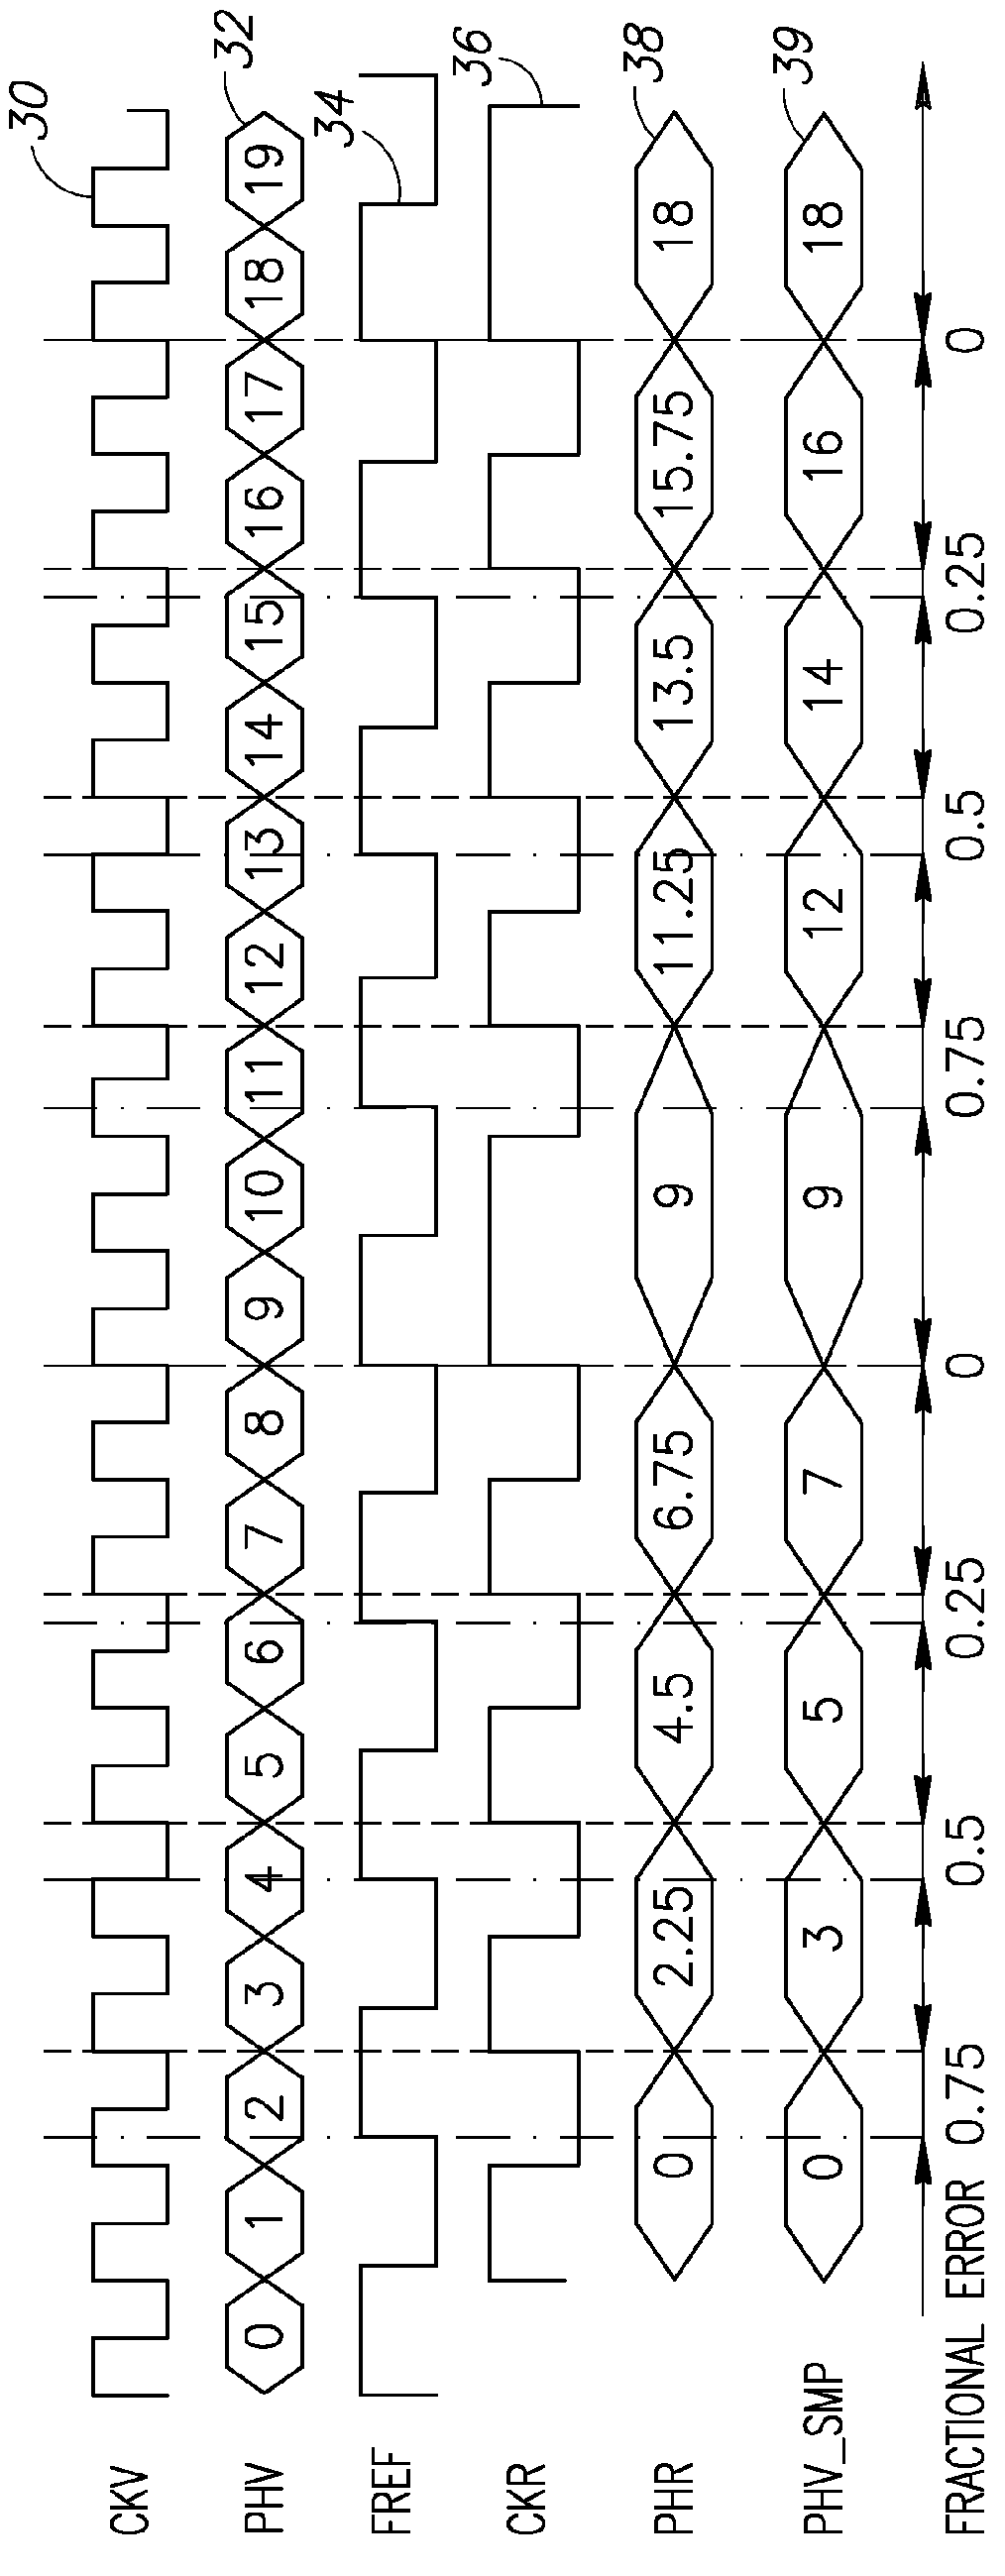 Fractional-N Frequency Synthesizer Incorporating Cyclic Digital-To-Time And Time-To-Digital Circuit Pair